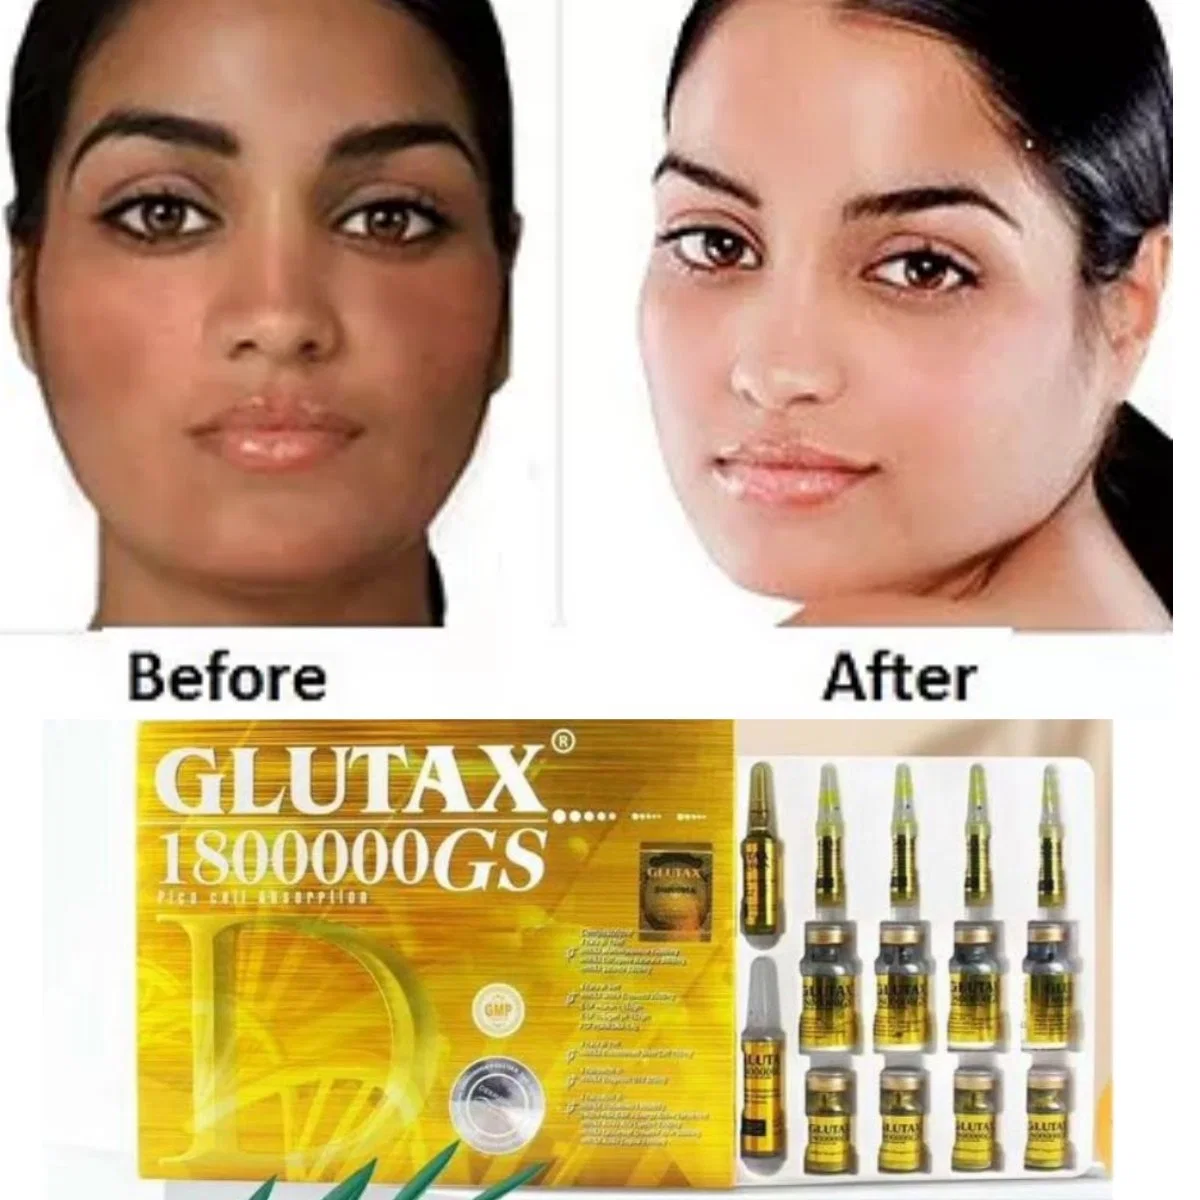 Hot Selling Italy IV Glutathione Glutax 2000GS 1800000GM Skin Whitening Injections for Clear Skin 70000GM 750000gx Lightening